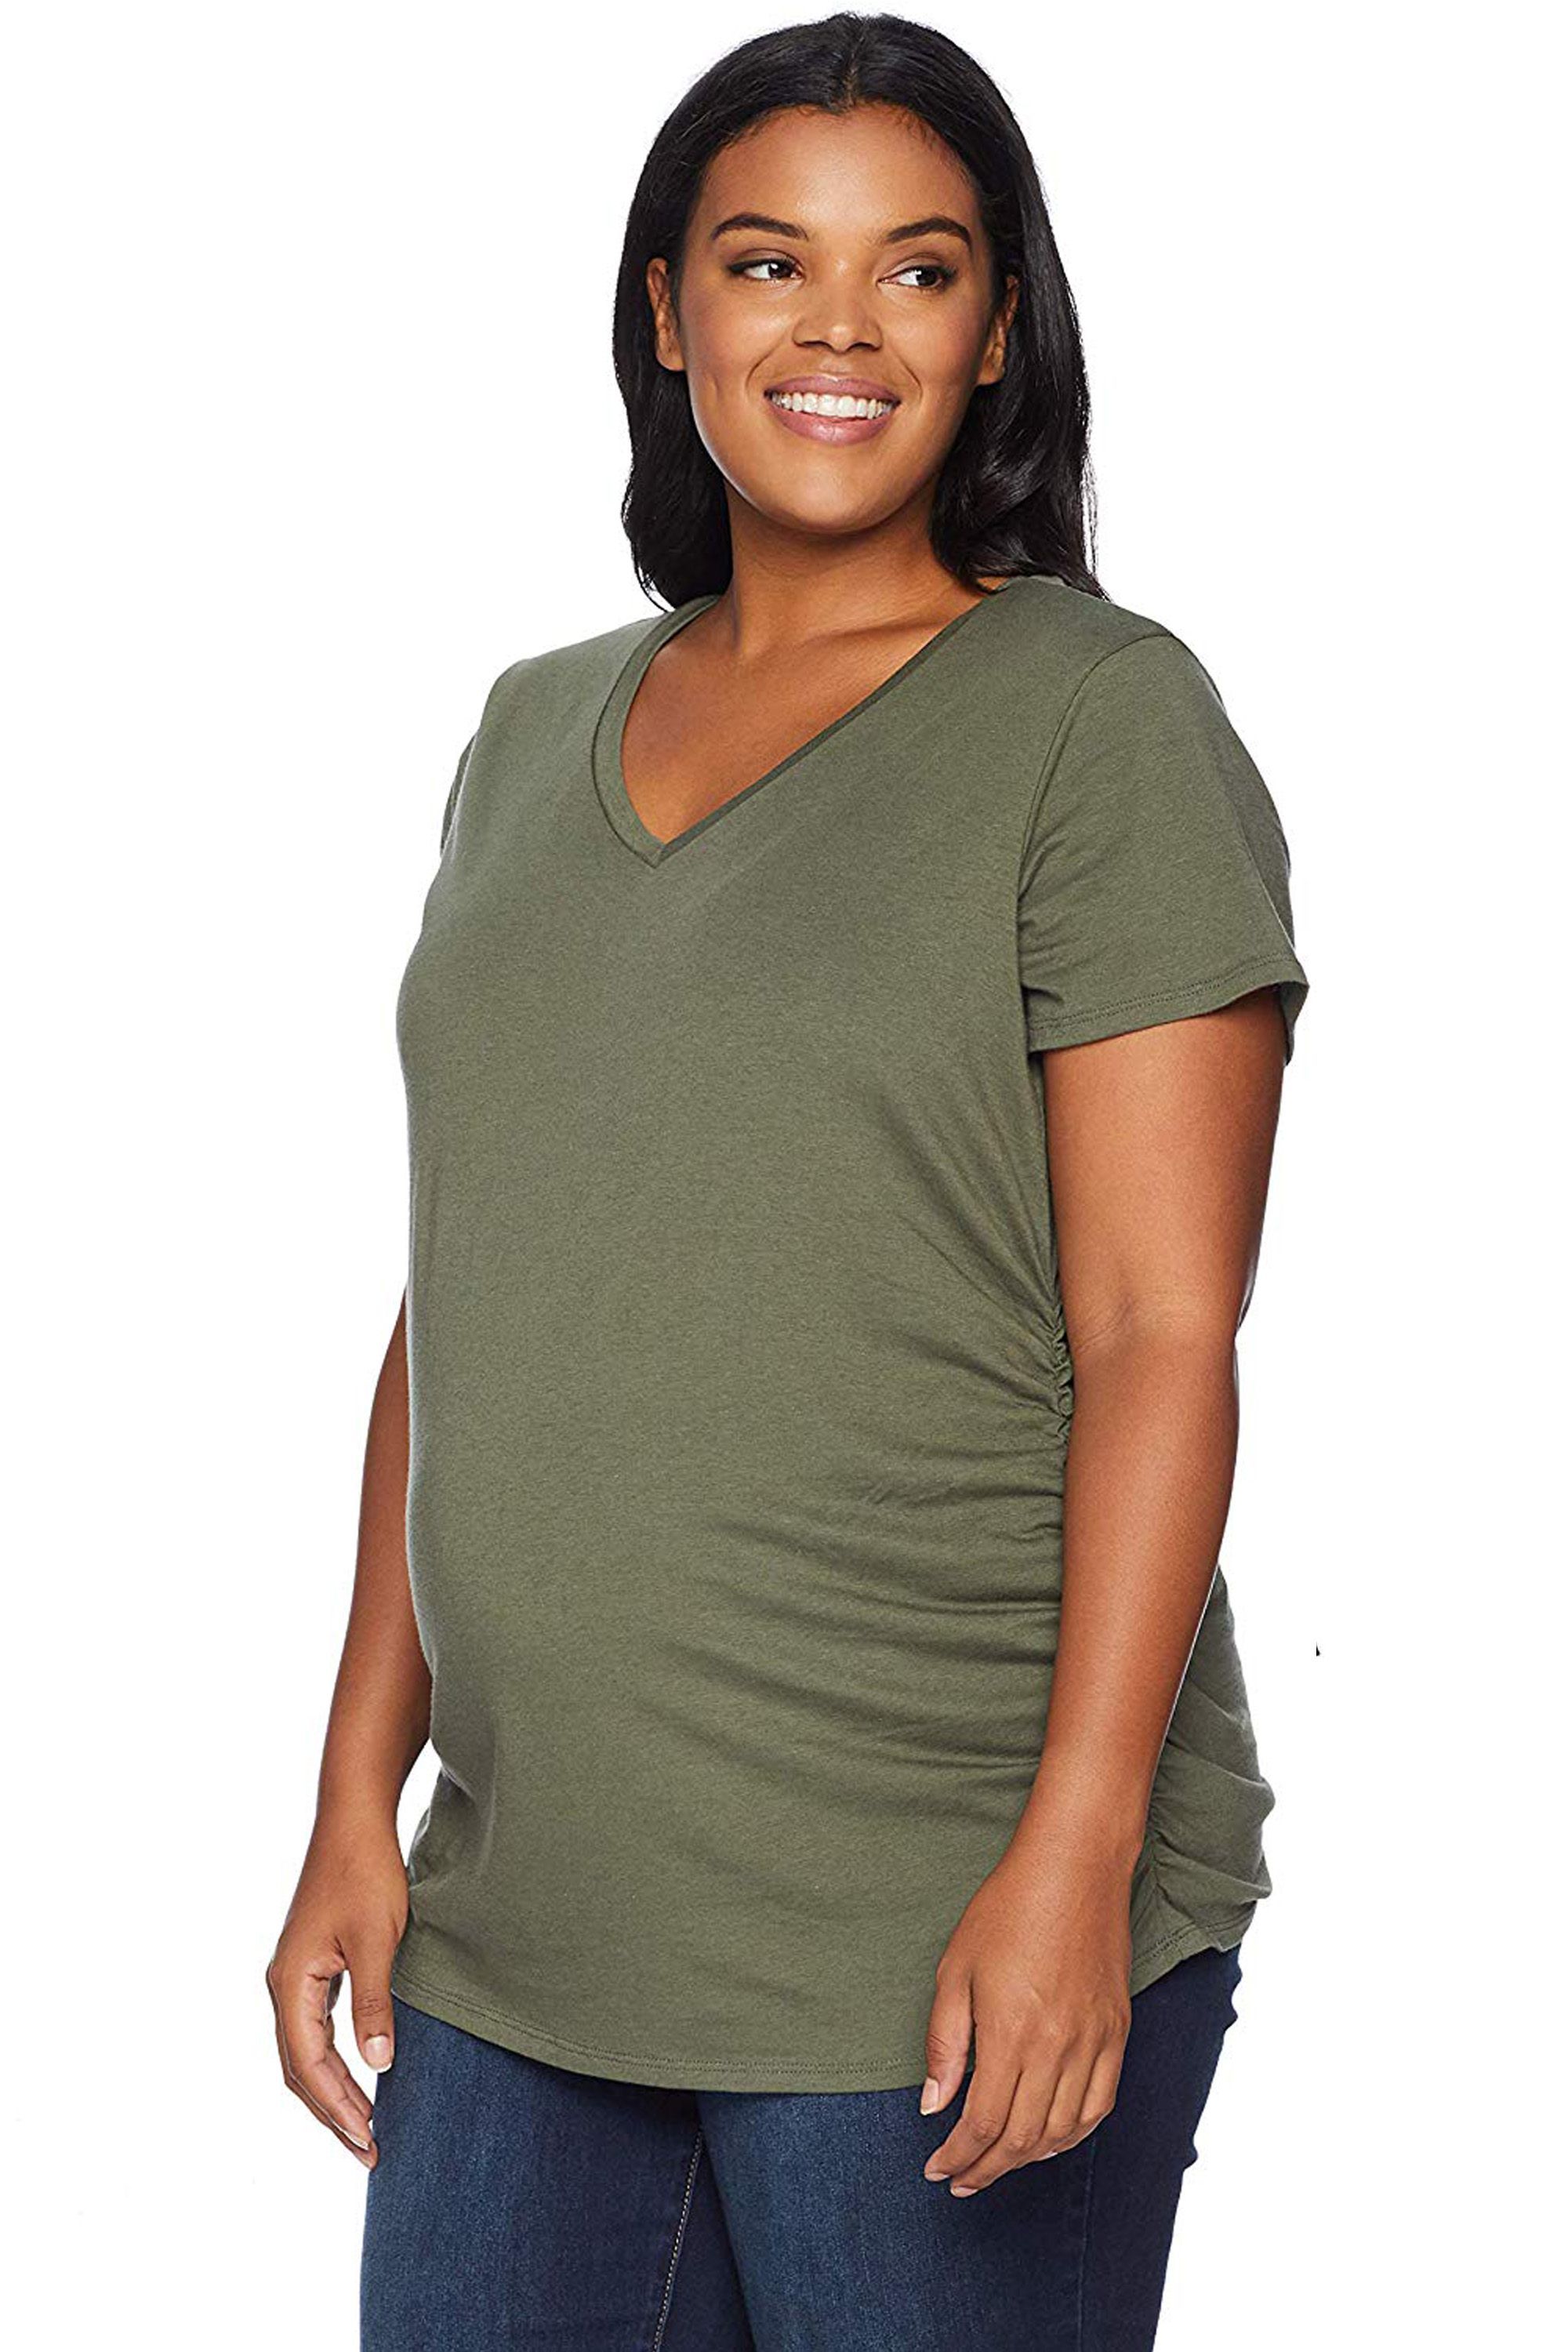 3XL Maternity Tops New Ladies V Neck Top Tunic size M 